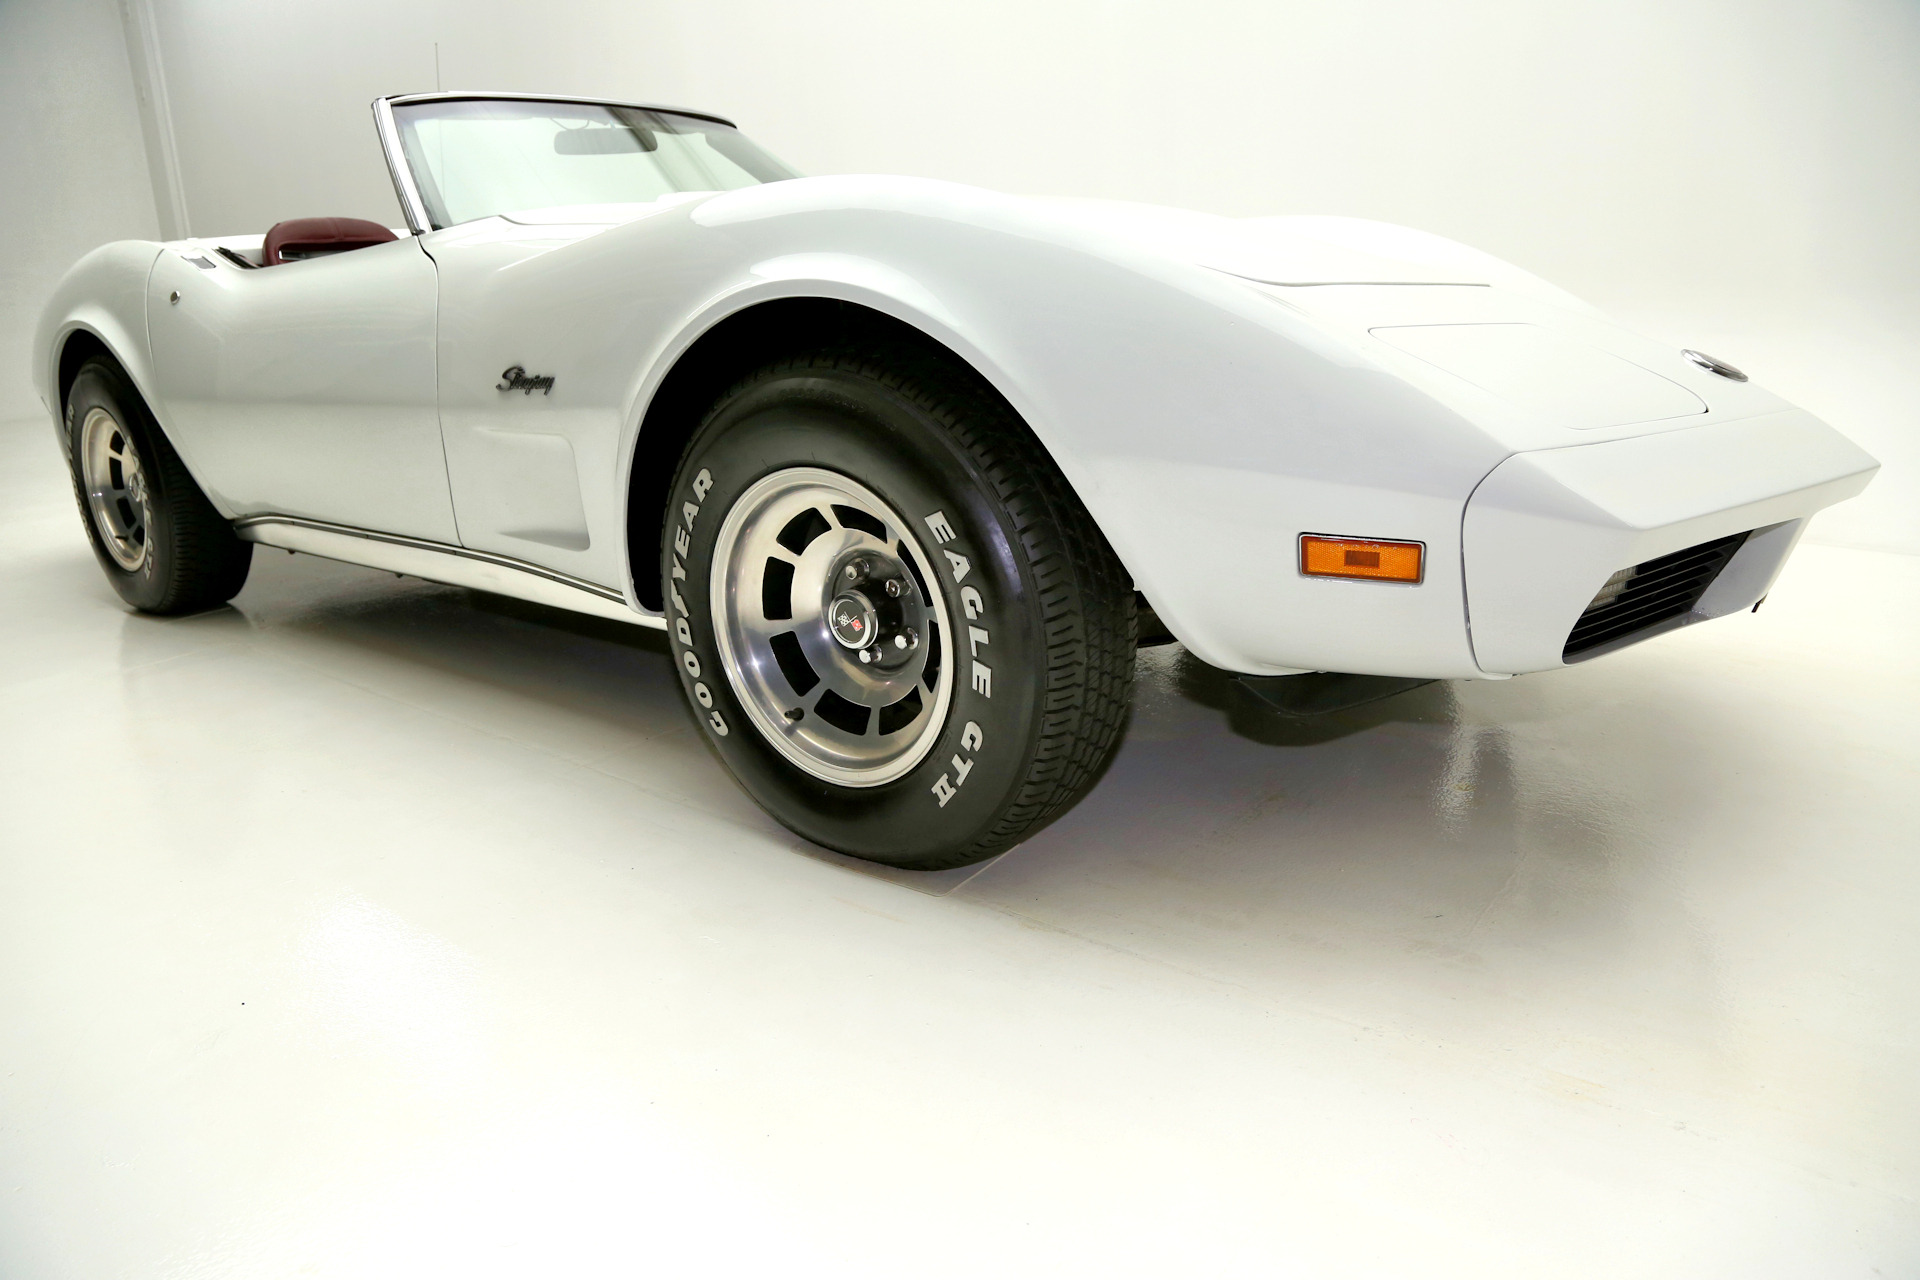 For Sale Used 1974 Chevrolet Corvette numbers matching | American Dream Machines Des Moines IA 50309